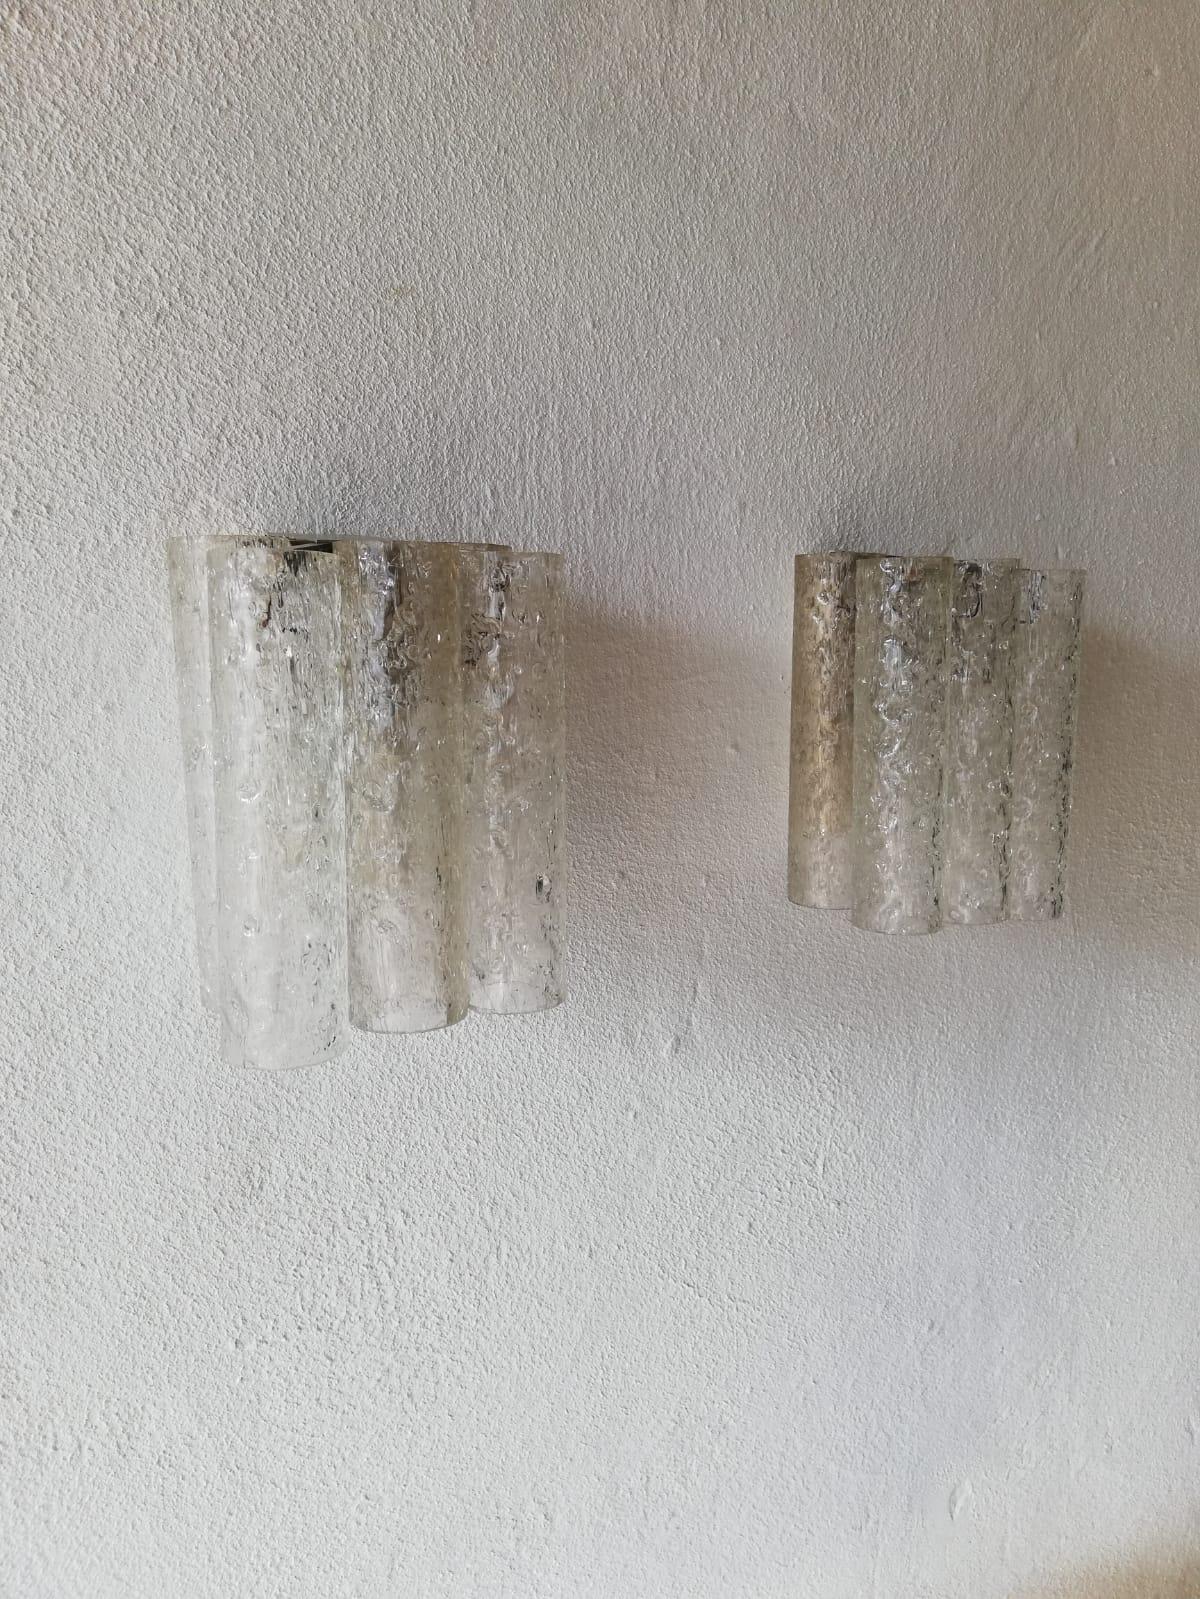 Ice glass tubes pair of sconces by Doria Leuchten, 1960s Germany

Excellent 3 tubes wall lamps.

Lamps are in very good vintage condition.

These lamps works with E14 standard light bulbs. 
Wired and suitable to use in all countries. (110-220